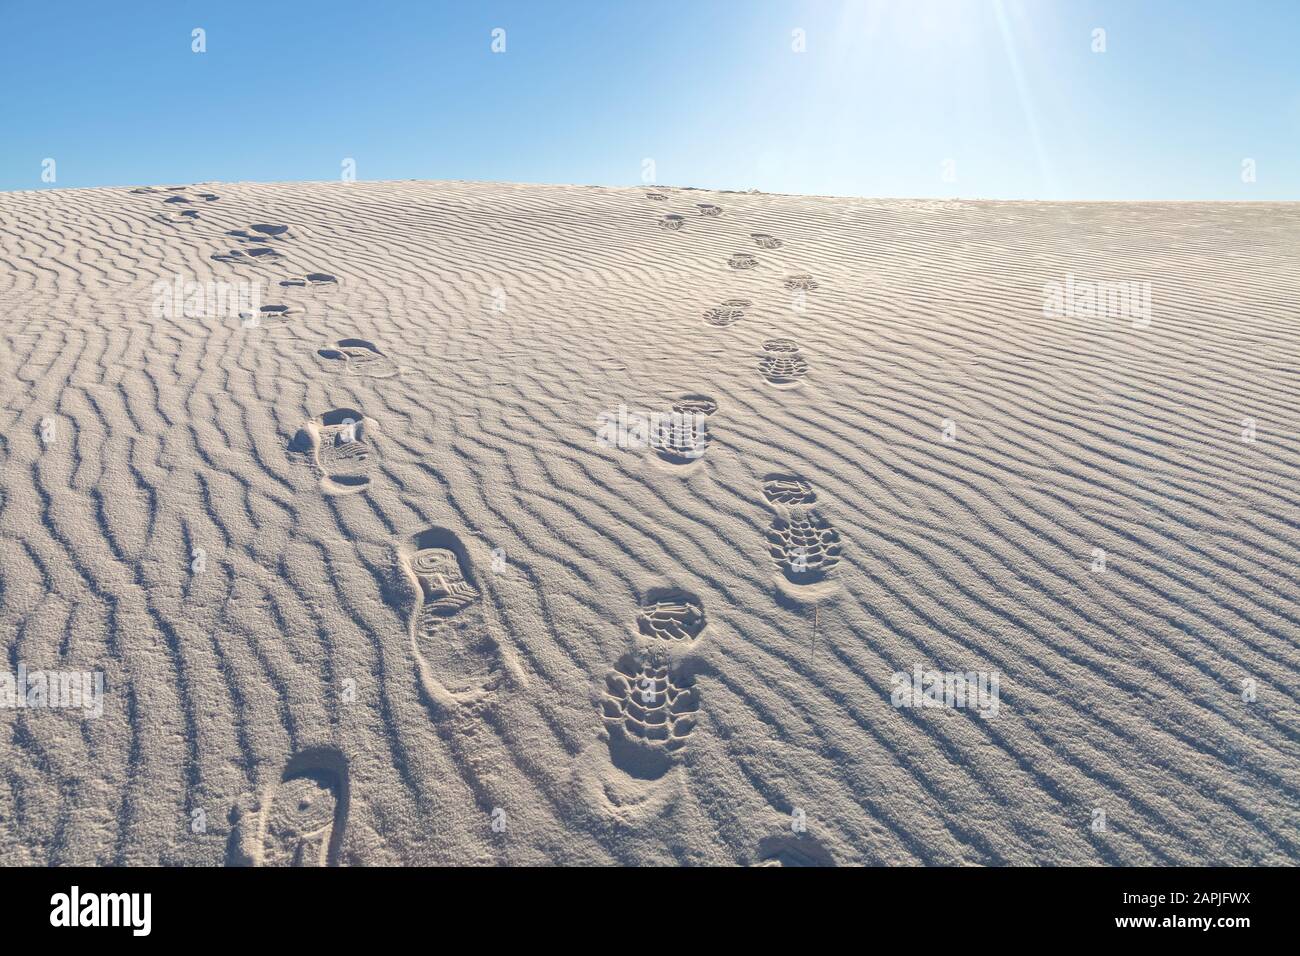 Foot prints on the sand dunes at White Sand National Monument, New Mexico, United States. Stock Photo